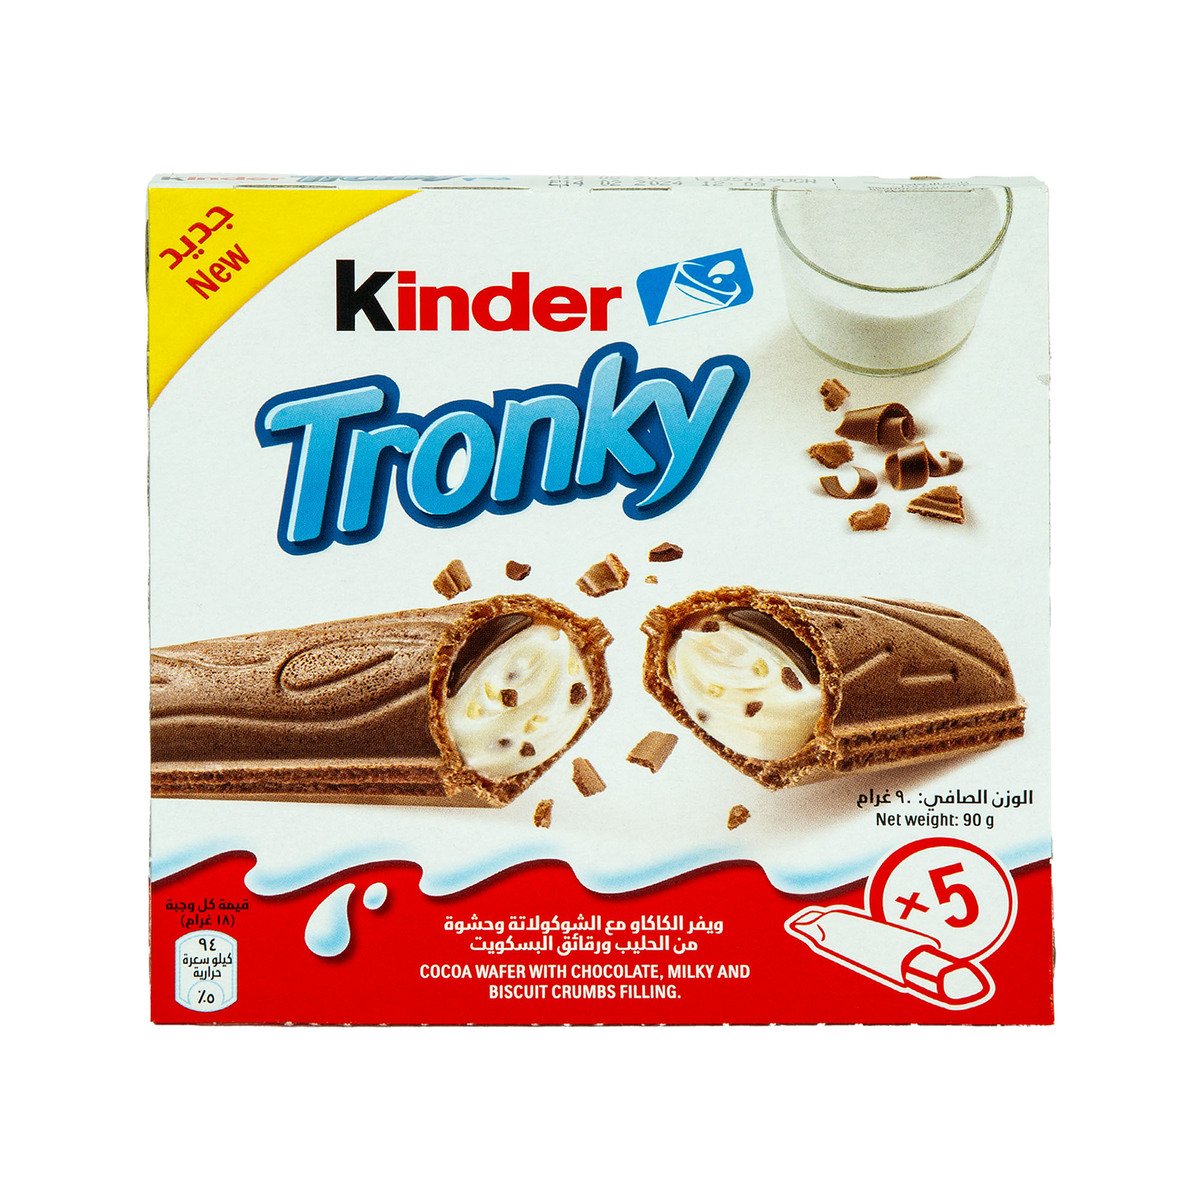 Kinder Tronky Wafer Biscuit 5 x 18 g